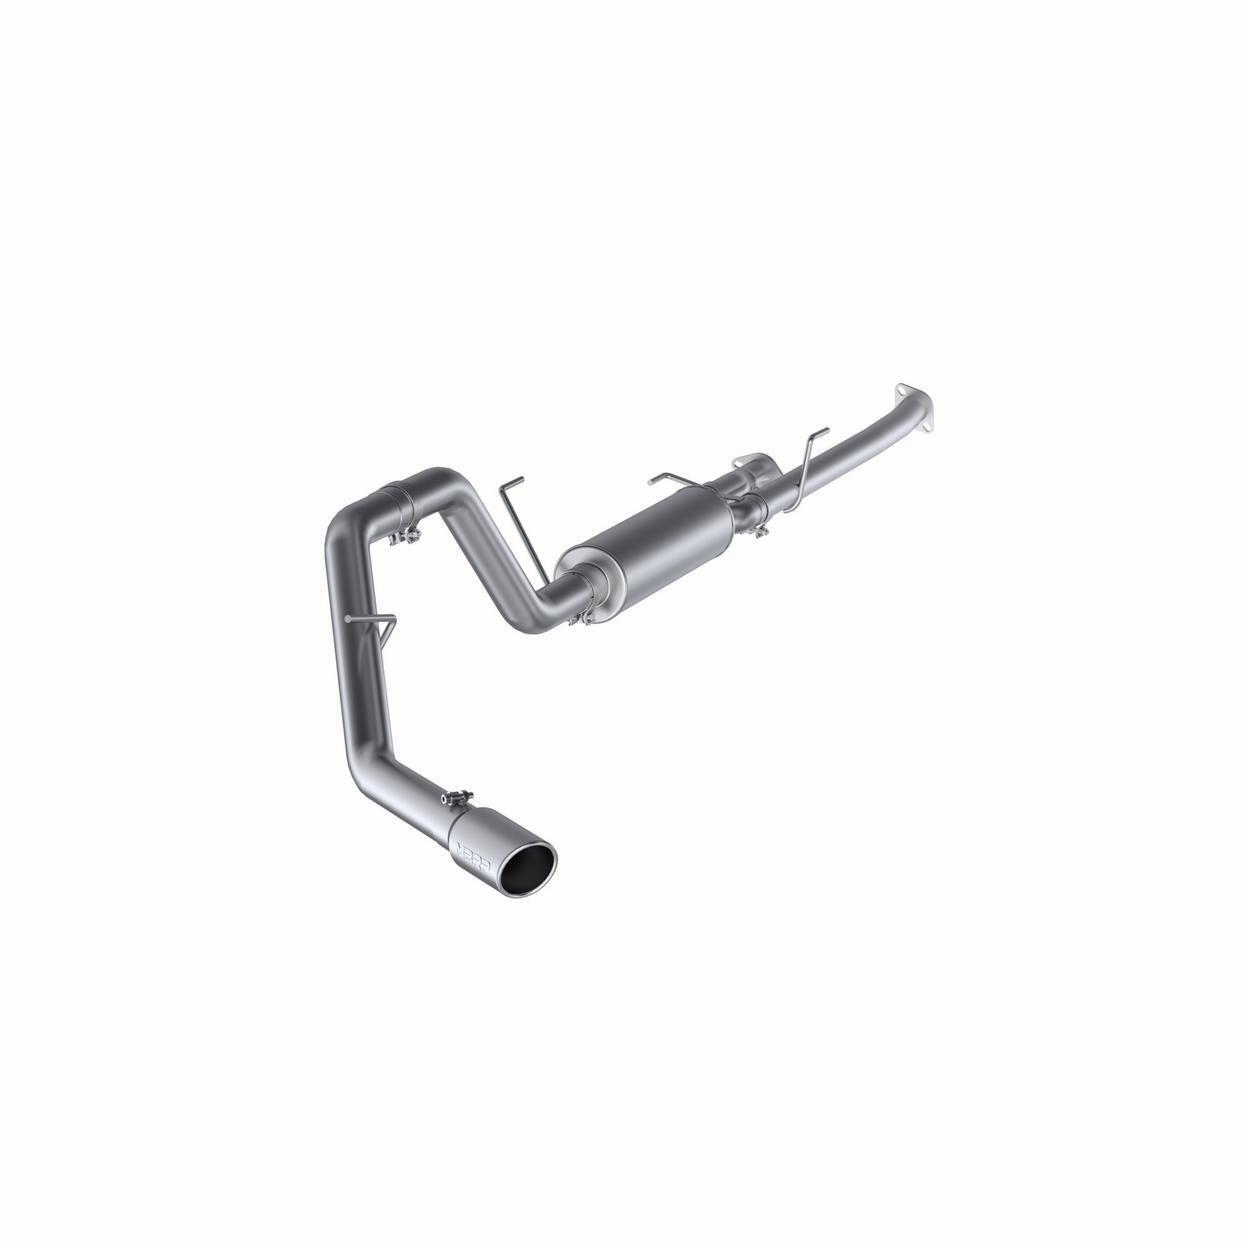 MBRP Exhaust S5314AL-FZ Exhaust System Kit for 2010-2012 Toyota Tundra